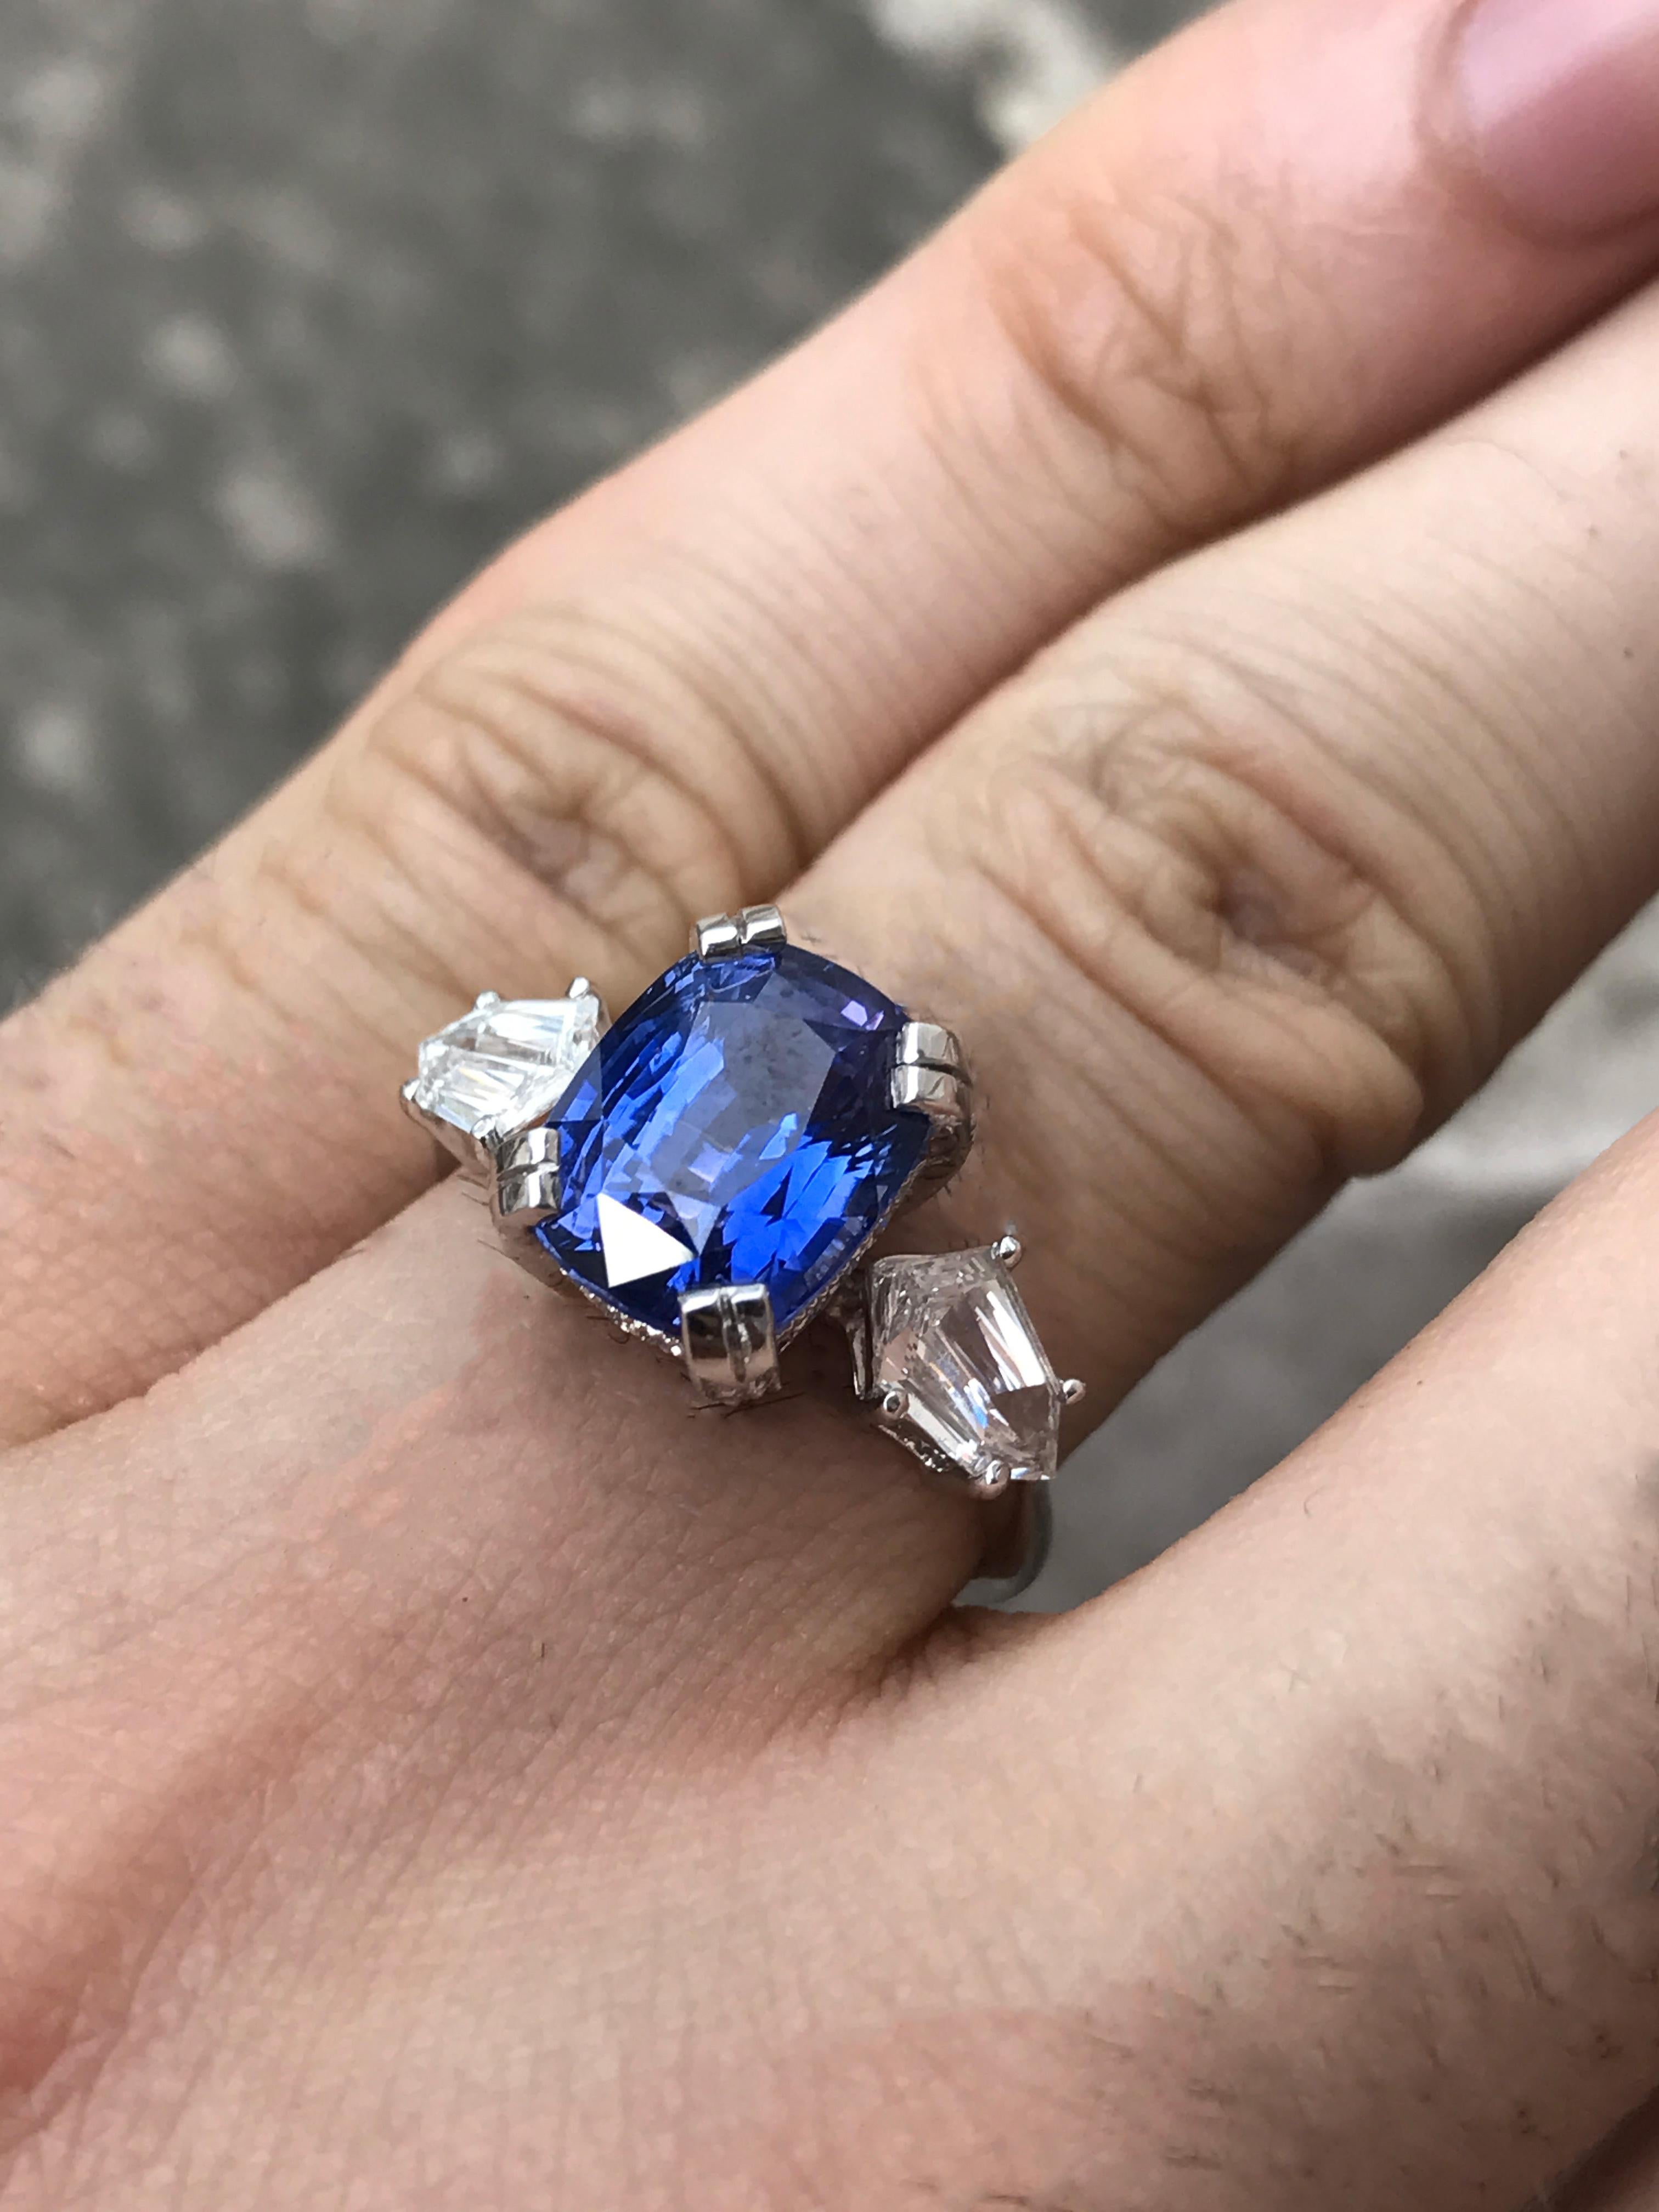 B8072003

5.52 Carat Blue Ceylon Sapphire , set in platinum. 2 Side Bullet Cut Diamonds weighing a total of 1.10 Carats G-H , VS

1. Carat Weight: 5.52 Sapphire

2. Color: Vivid Blue

3. Tone:  Medium - 7.5 Out of 10 (Best tone, not too light and